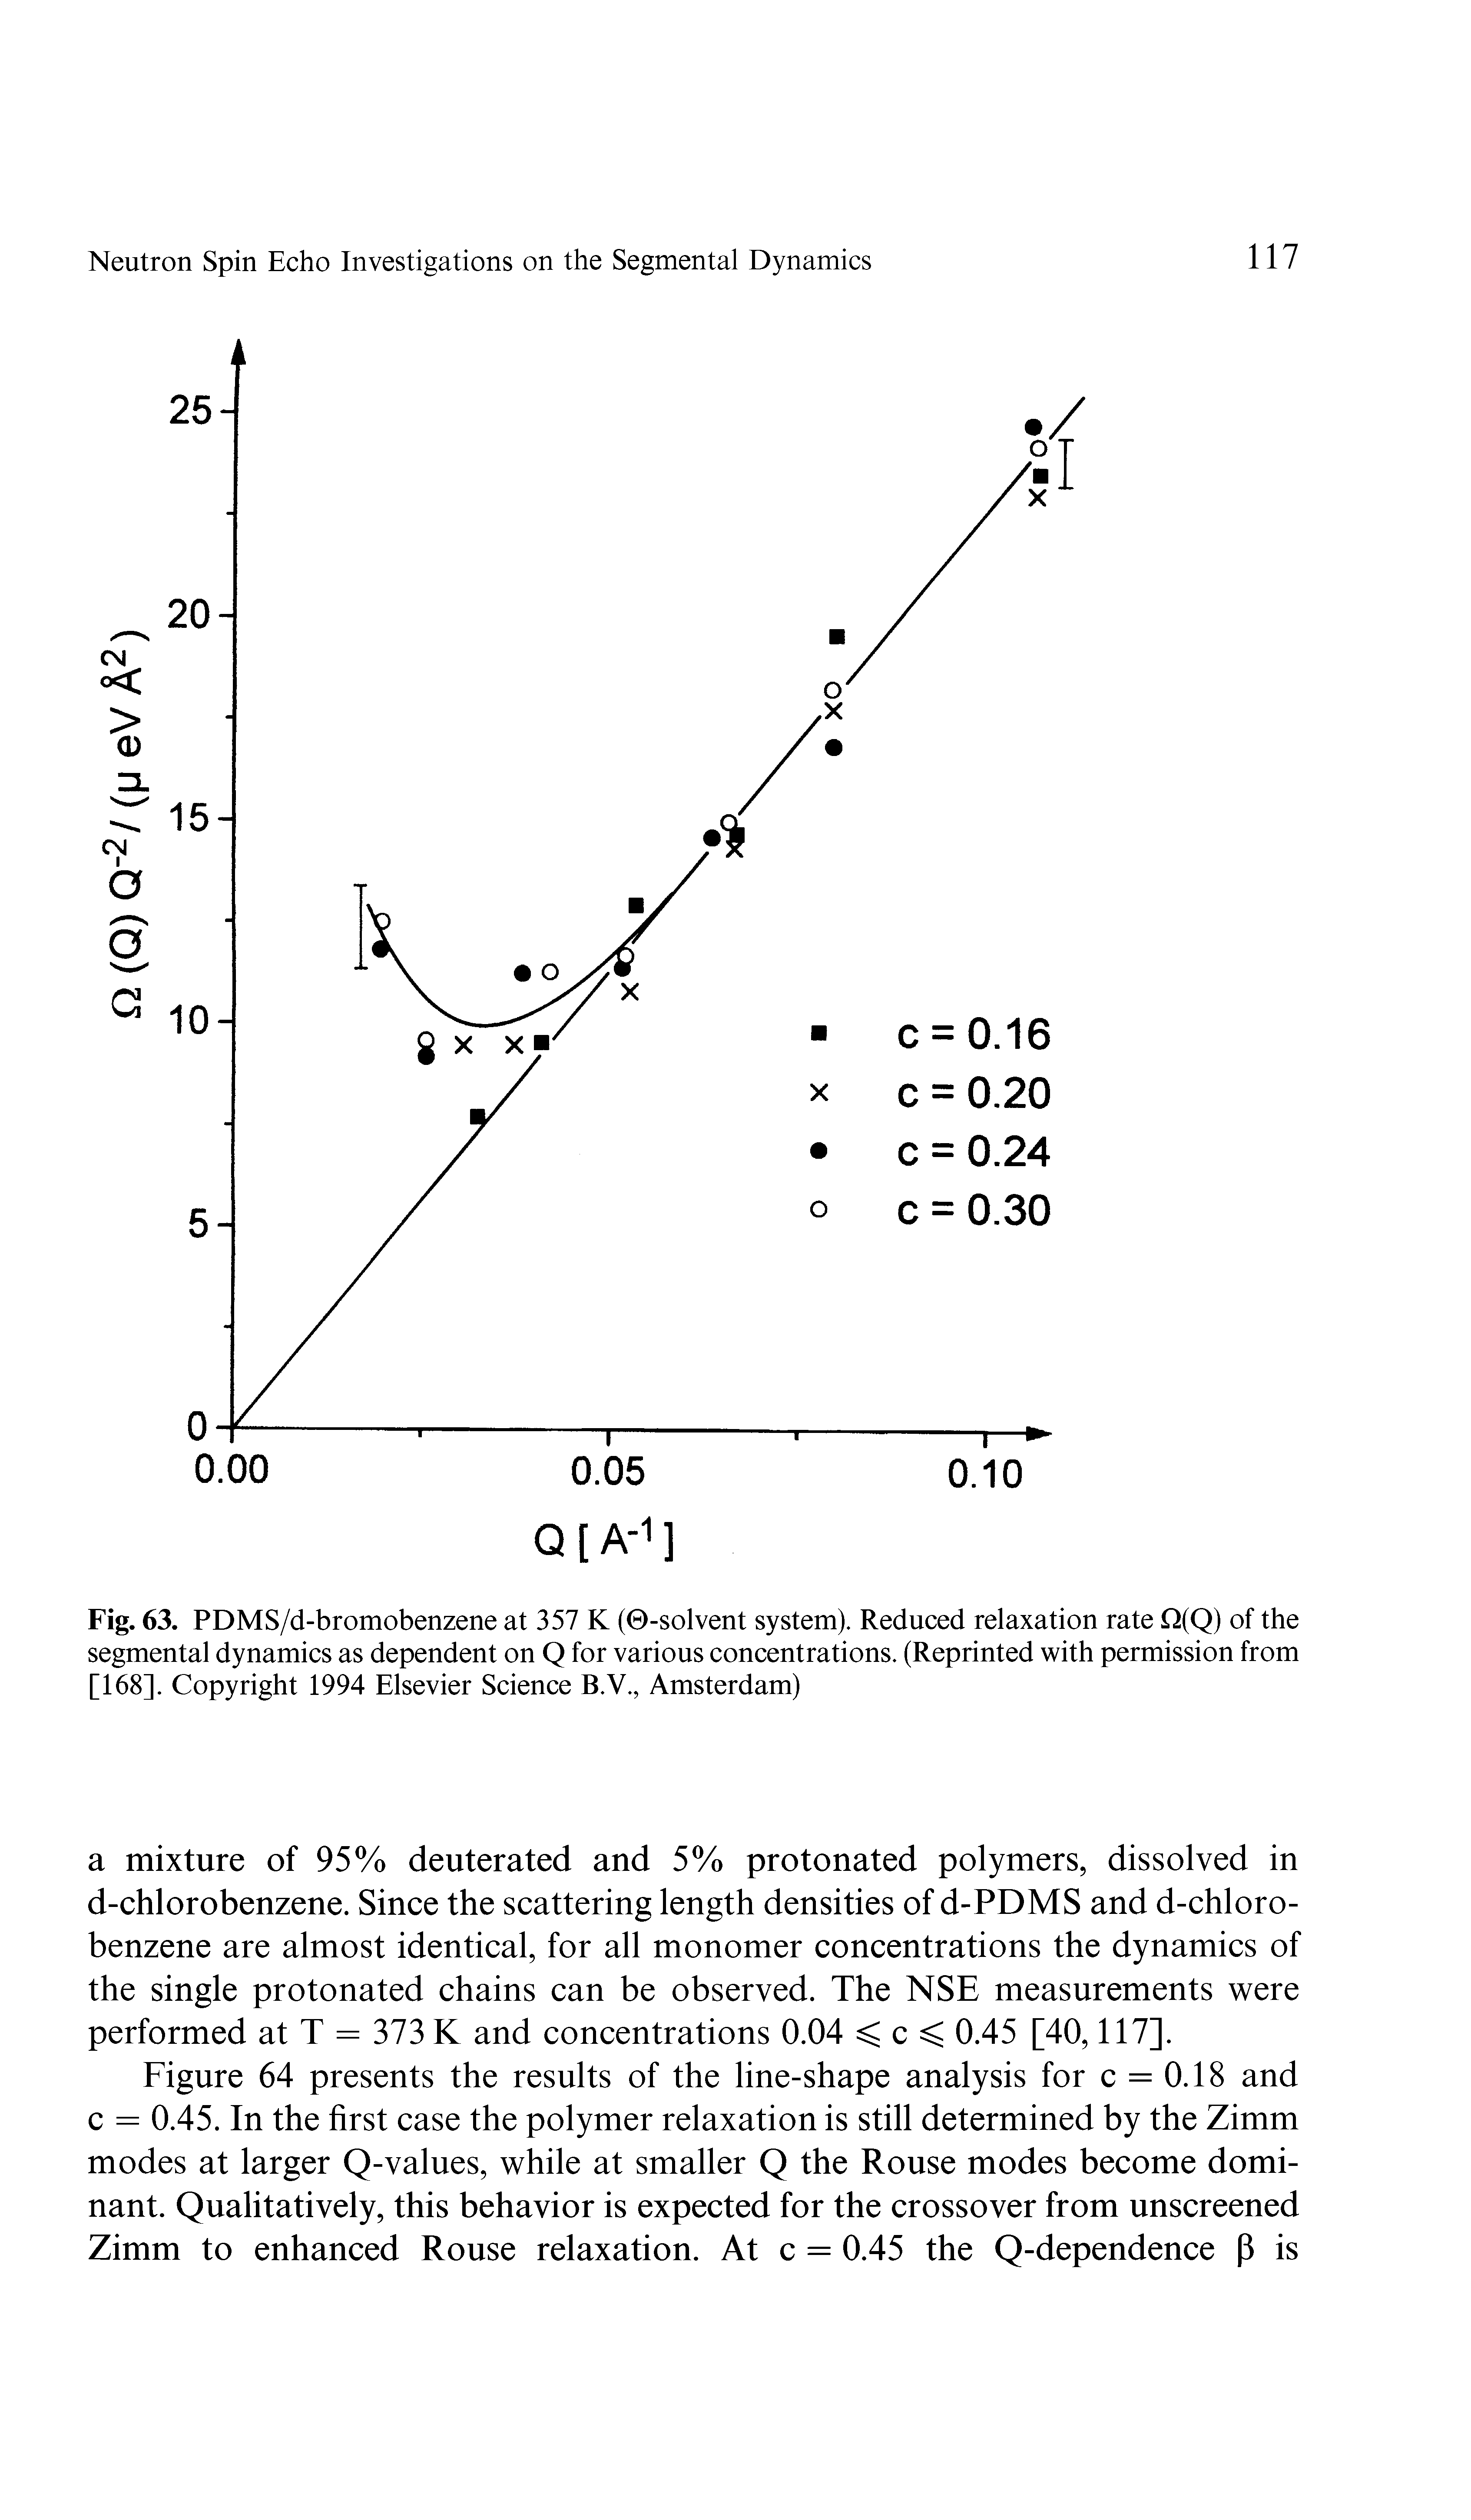 Fig. 63. PDMS/d-bromobenzene at 357 K (0-solvent system). Reduced relaxation rate Q(Q) of the segmental dynamics as dependent on Q for various concentrations. (Reprinted with permission from [168]. Copyright 1994 Elsevier Science B.V., Amsterdam)...